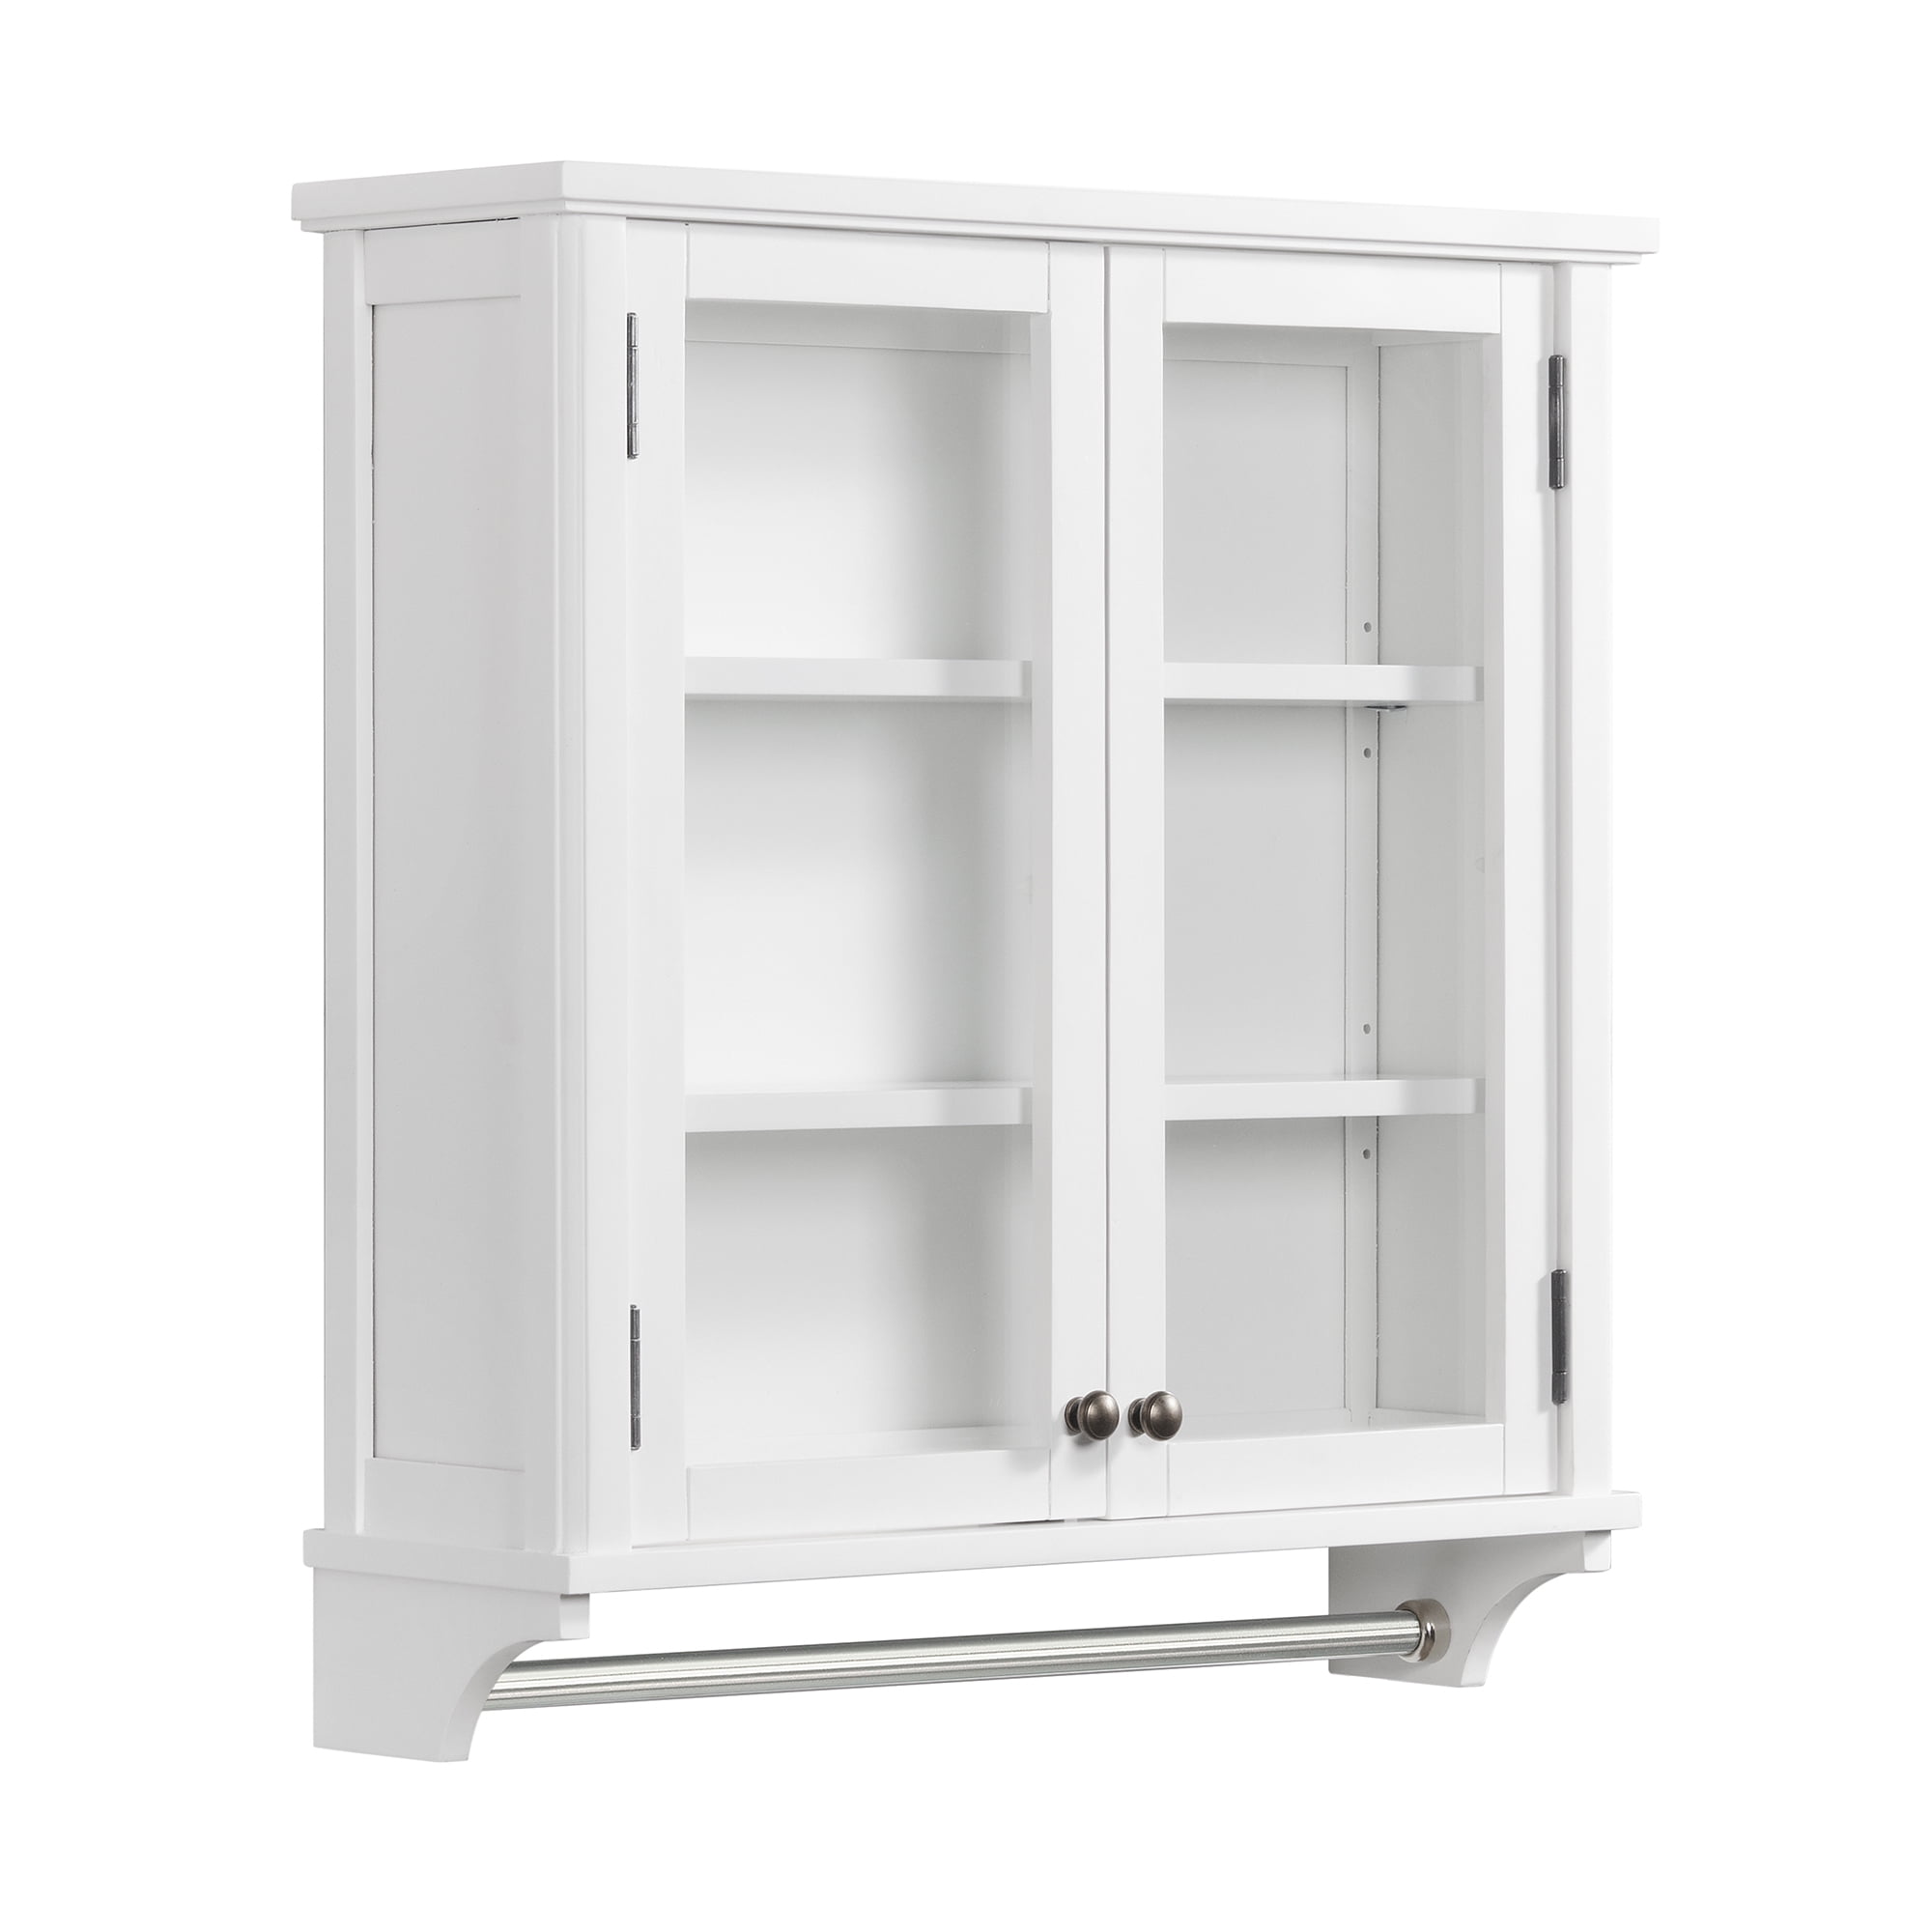 Alaterre Furniture Dorset 27W x 29H Wall Mounted Bath Storage Cabinet with Two Open Shelves